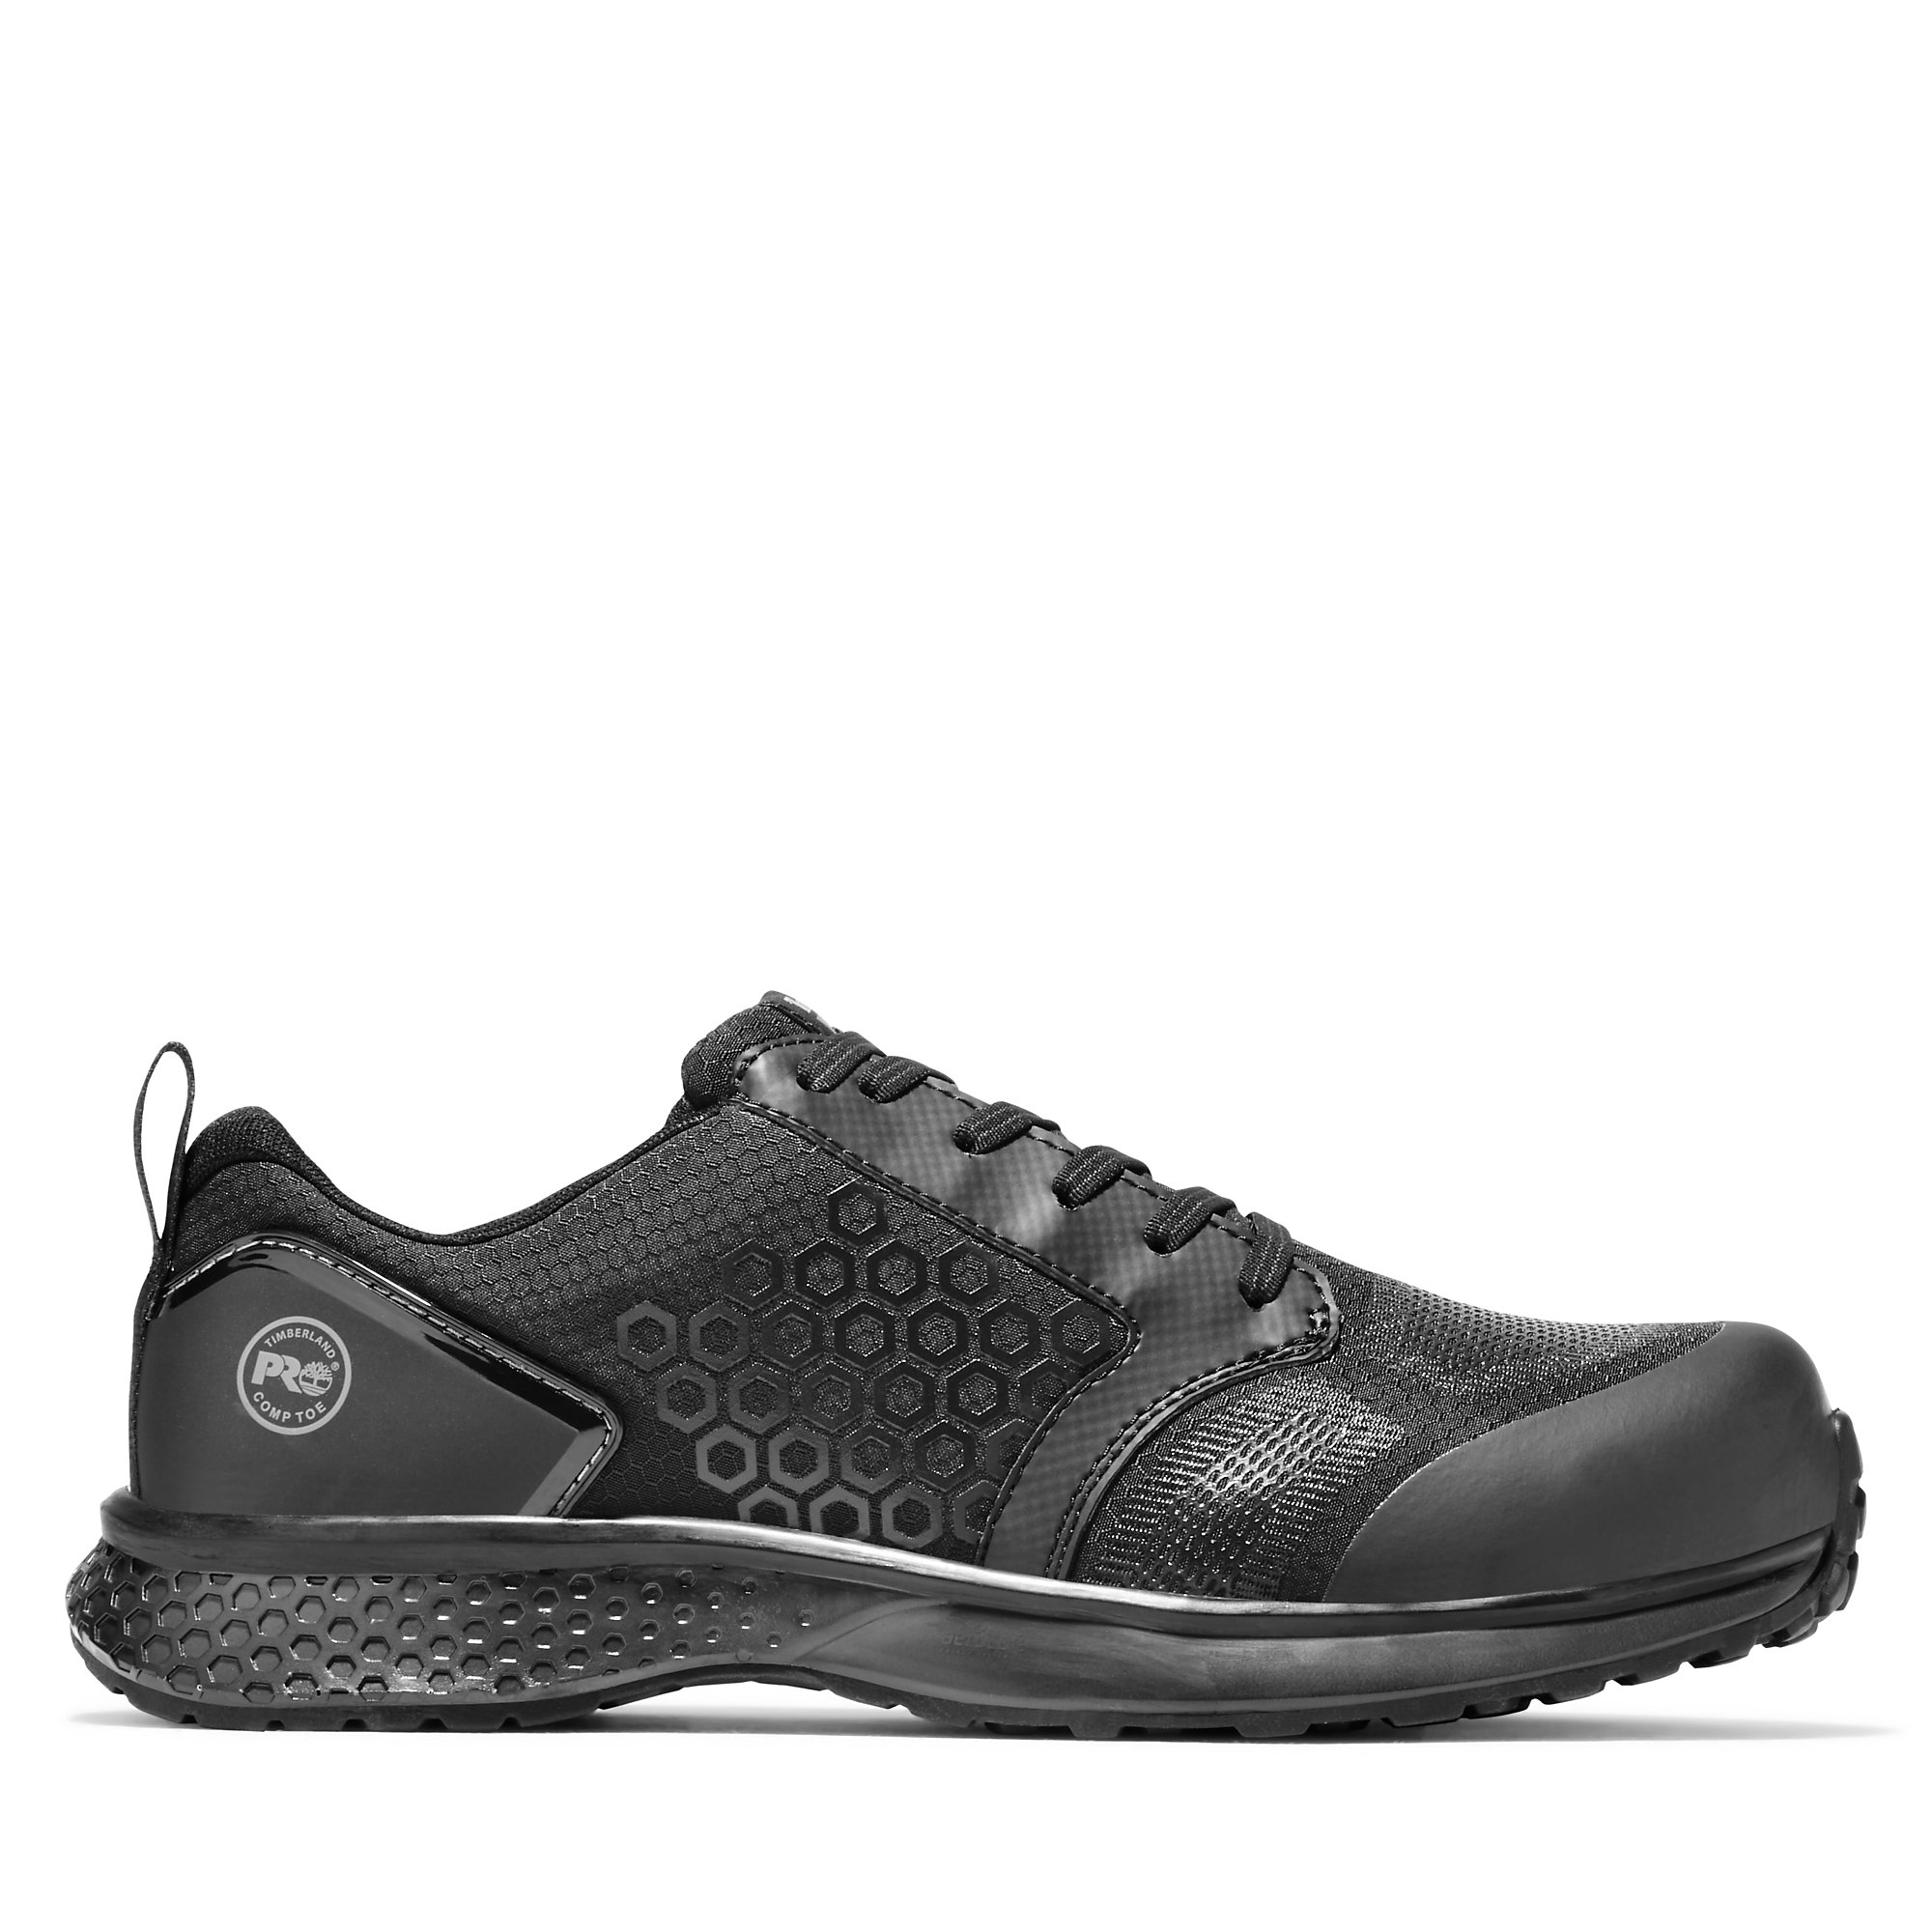 Timberland Pro - Mens Reaxion Nt Lowtop Shoe